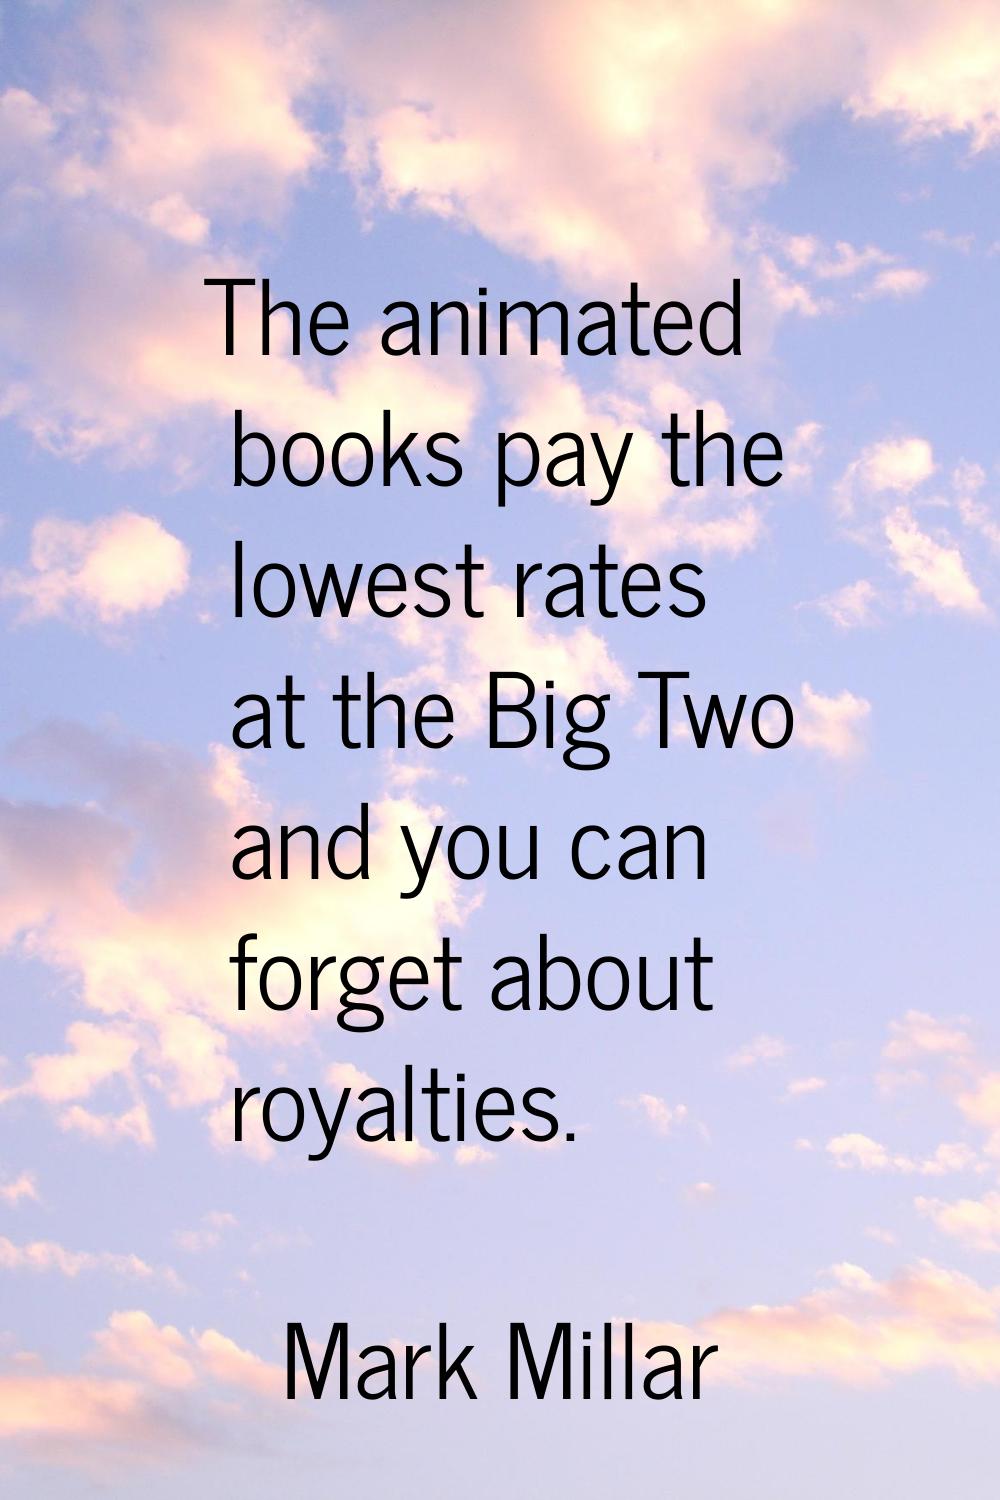 The animated books pay the lowest rates at the Big Two and you can forget about royalties.